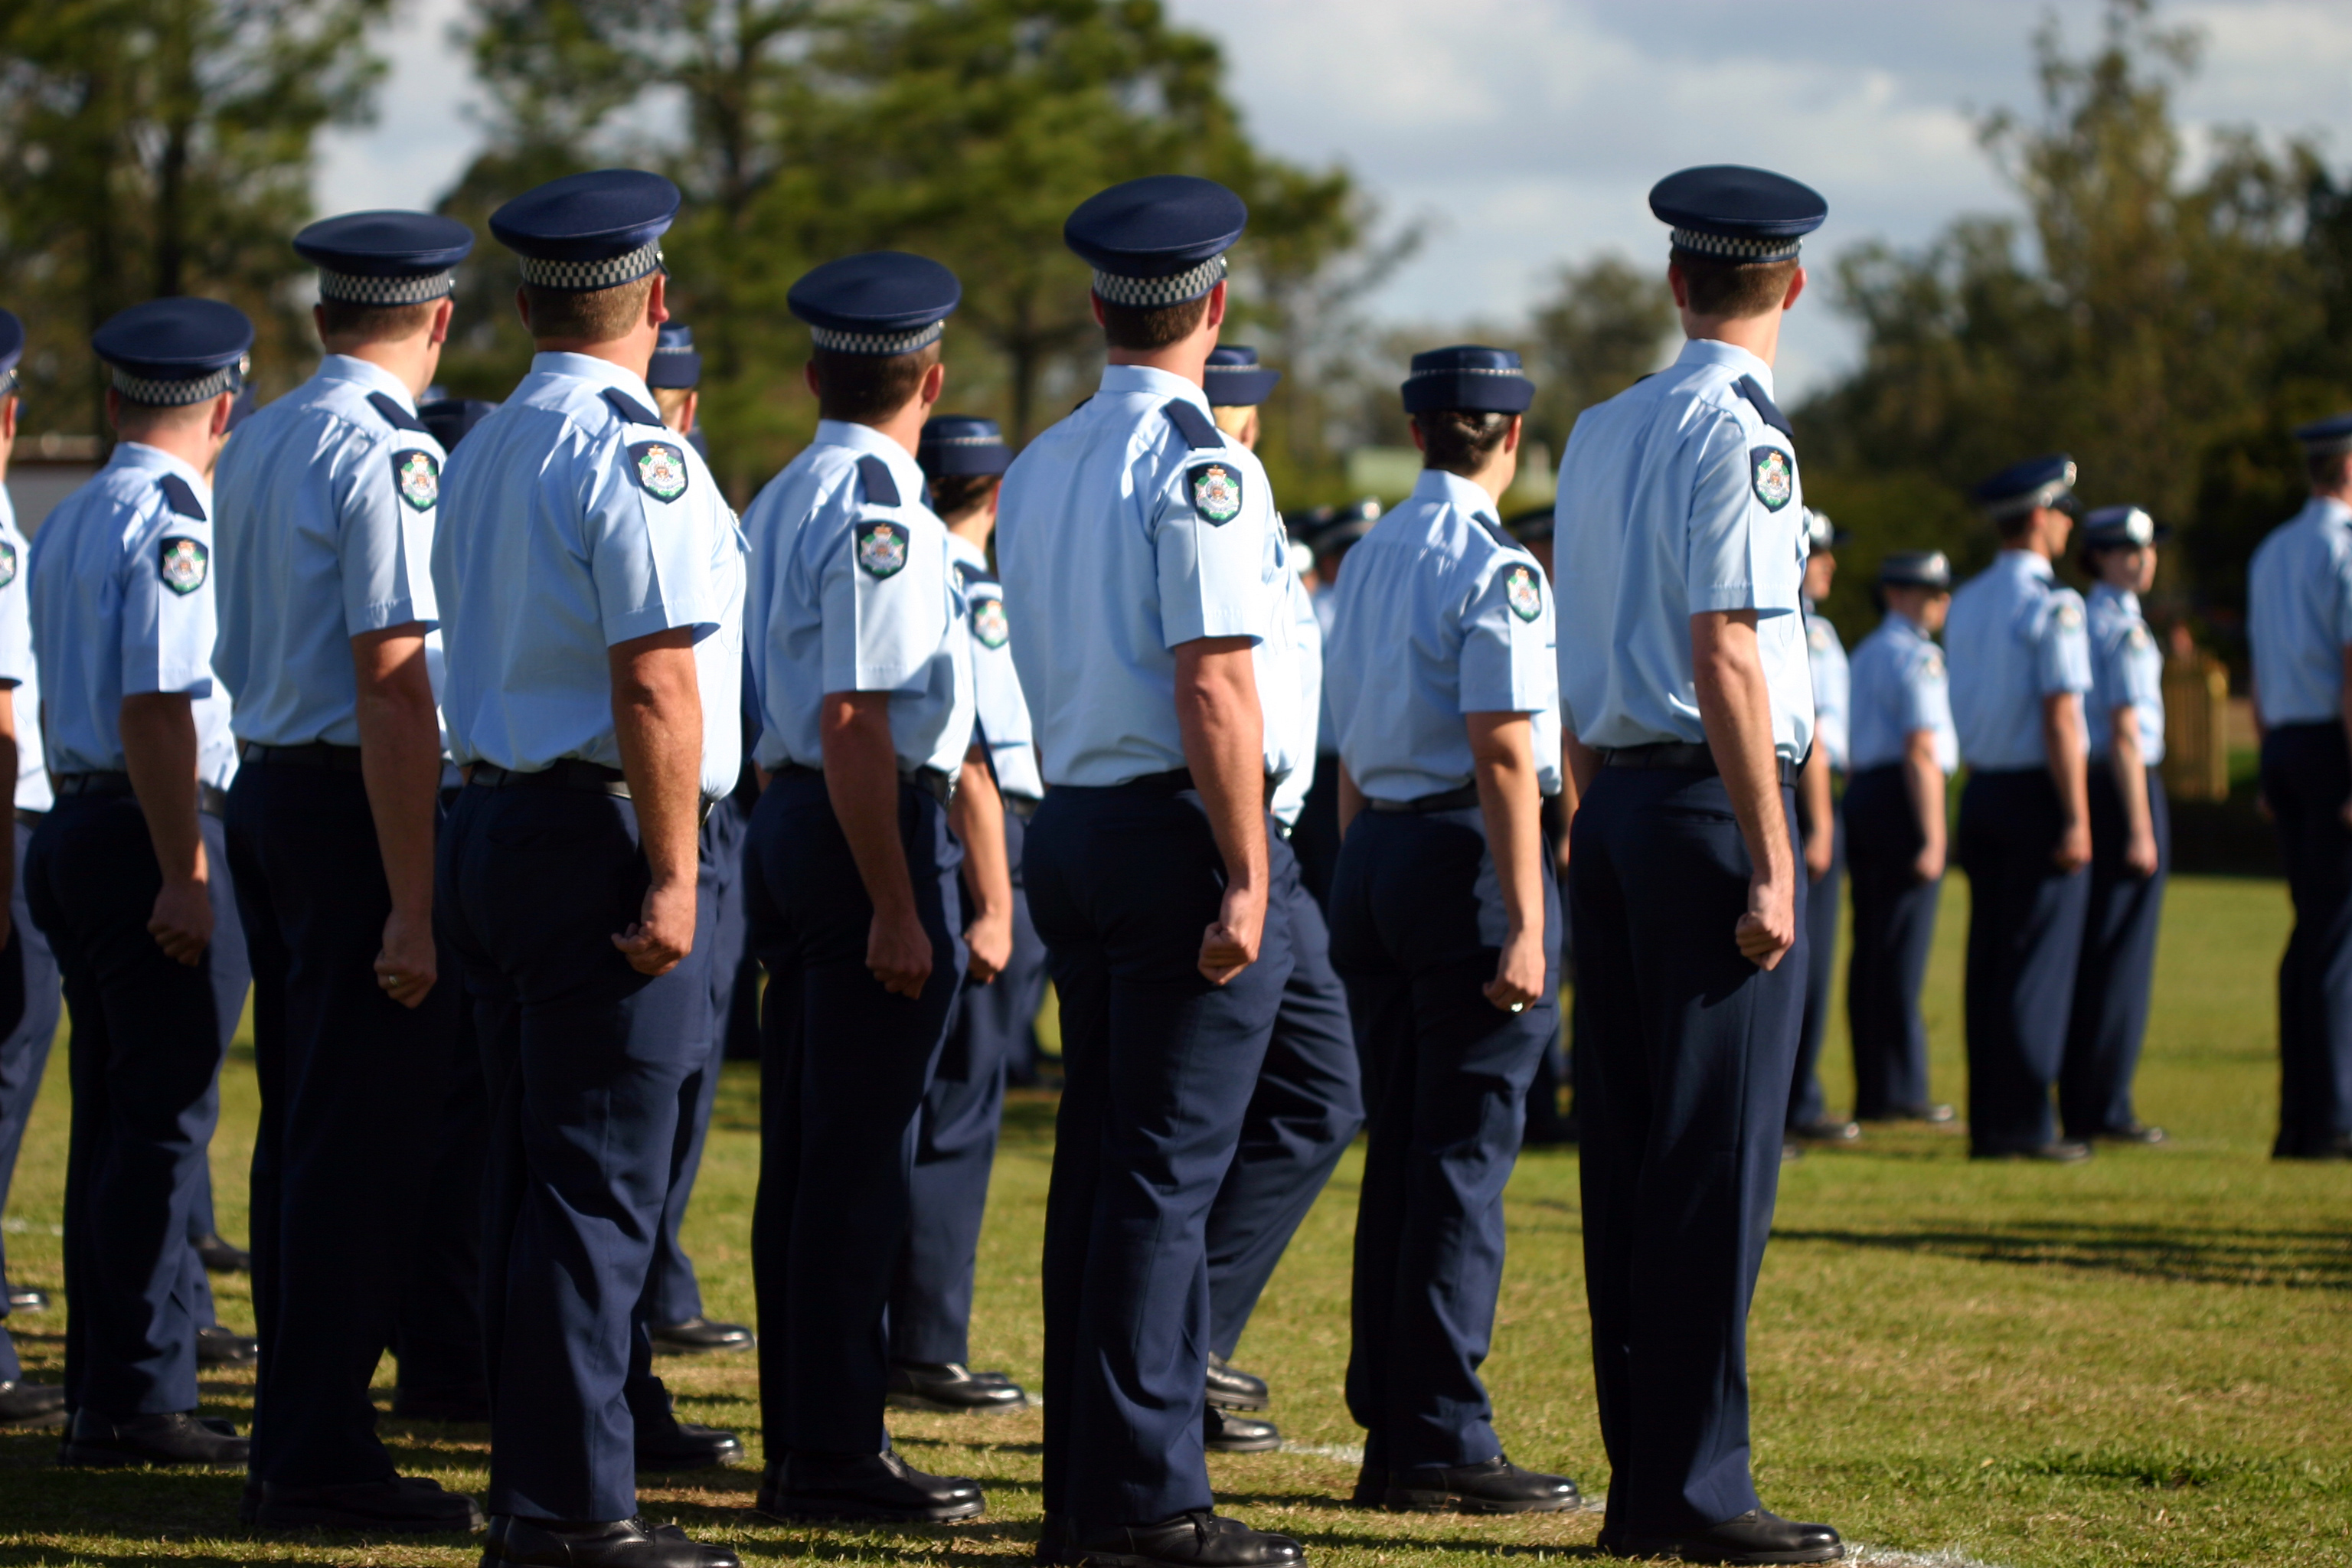 queensland police recruits offered $20,000 hecs relief